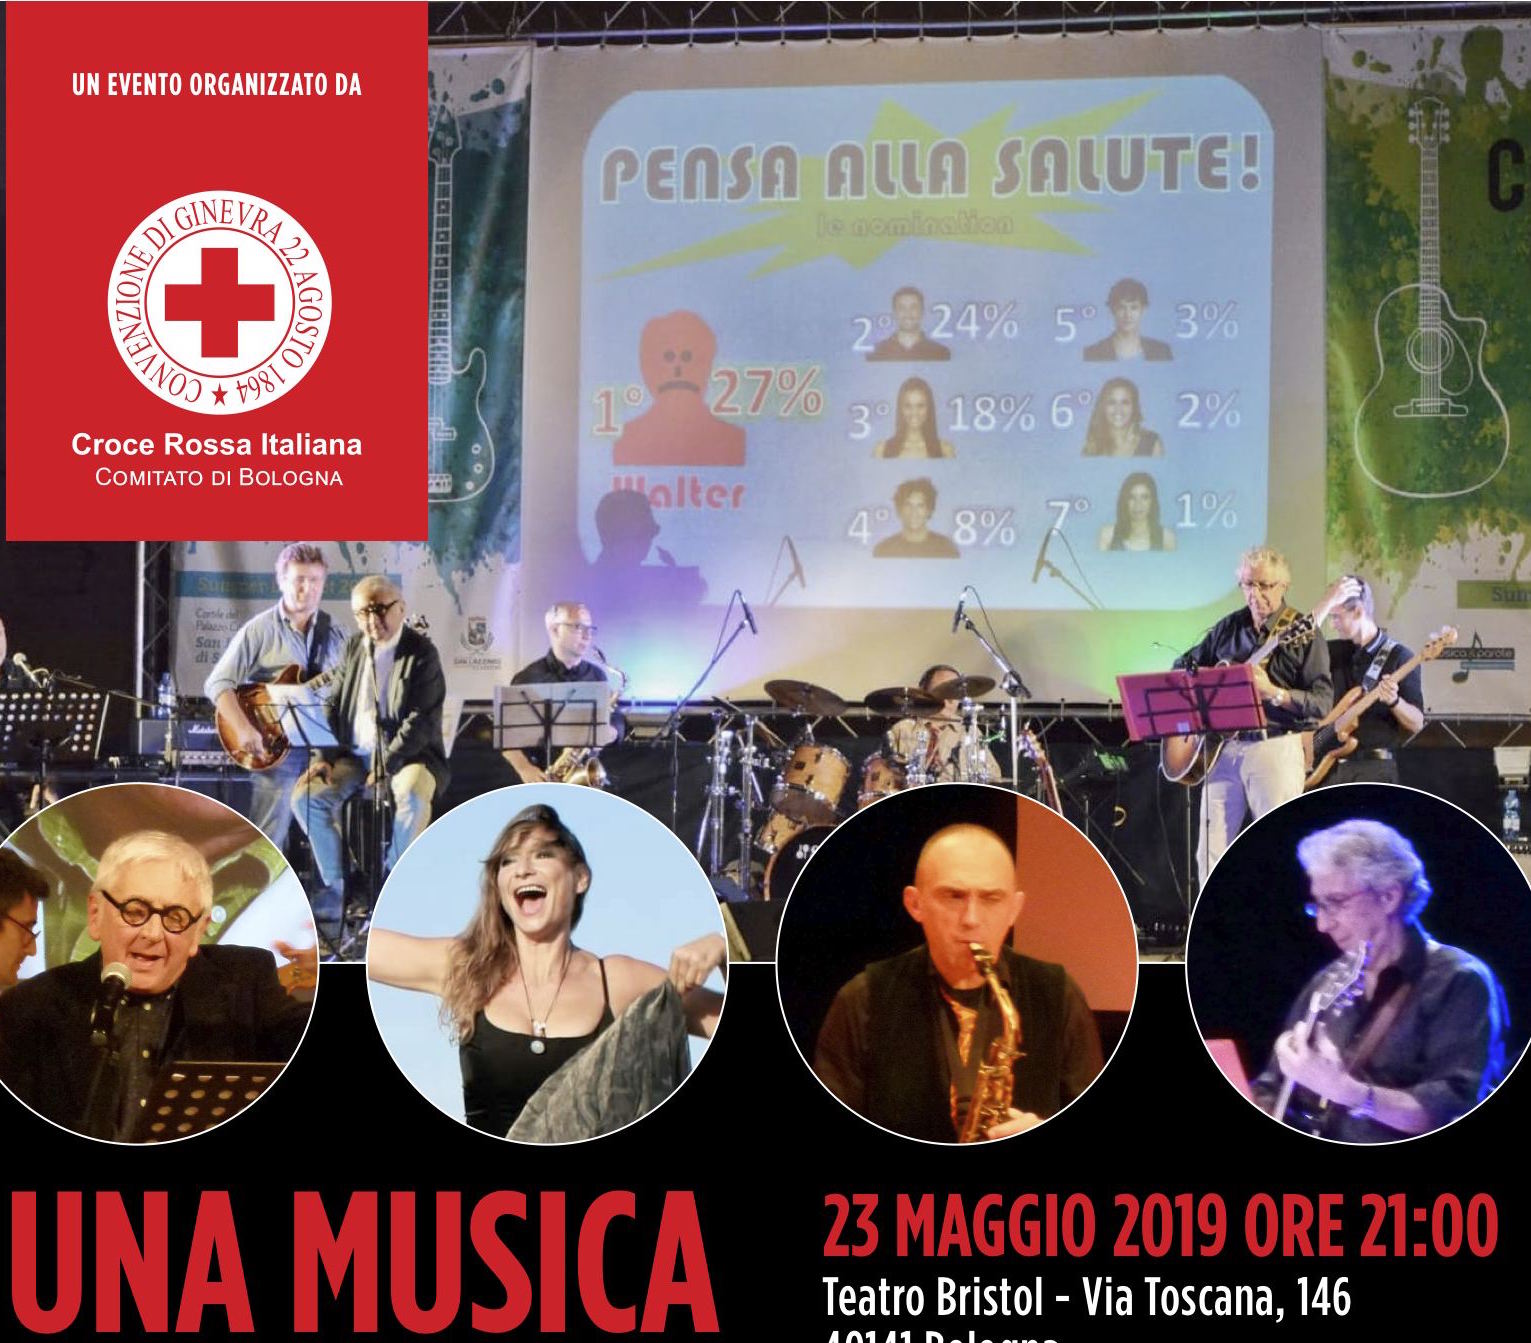 Romagnoli F.lli Spa confirms their support of the Italian Red Cross - Committee of Bologna 